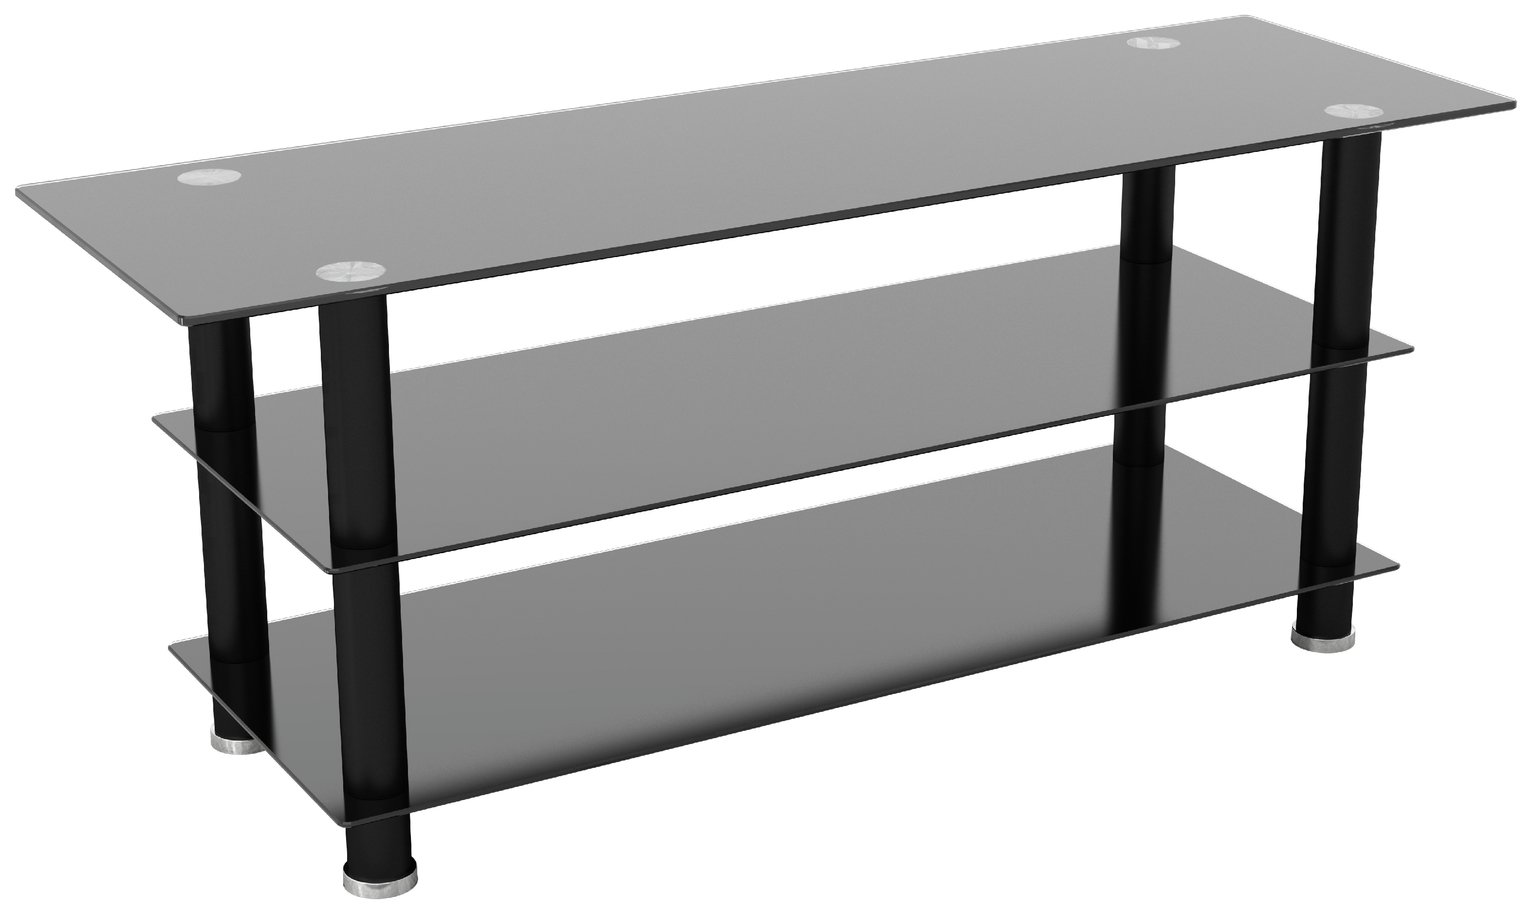 Cheap TV Stands and Sales From Argos, Currys, Very, Tesco ...